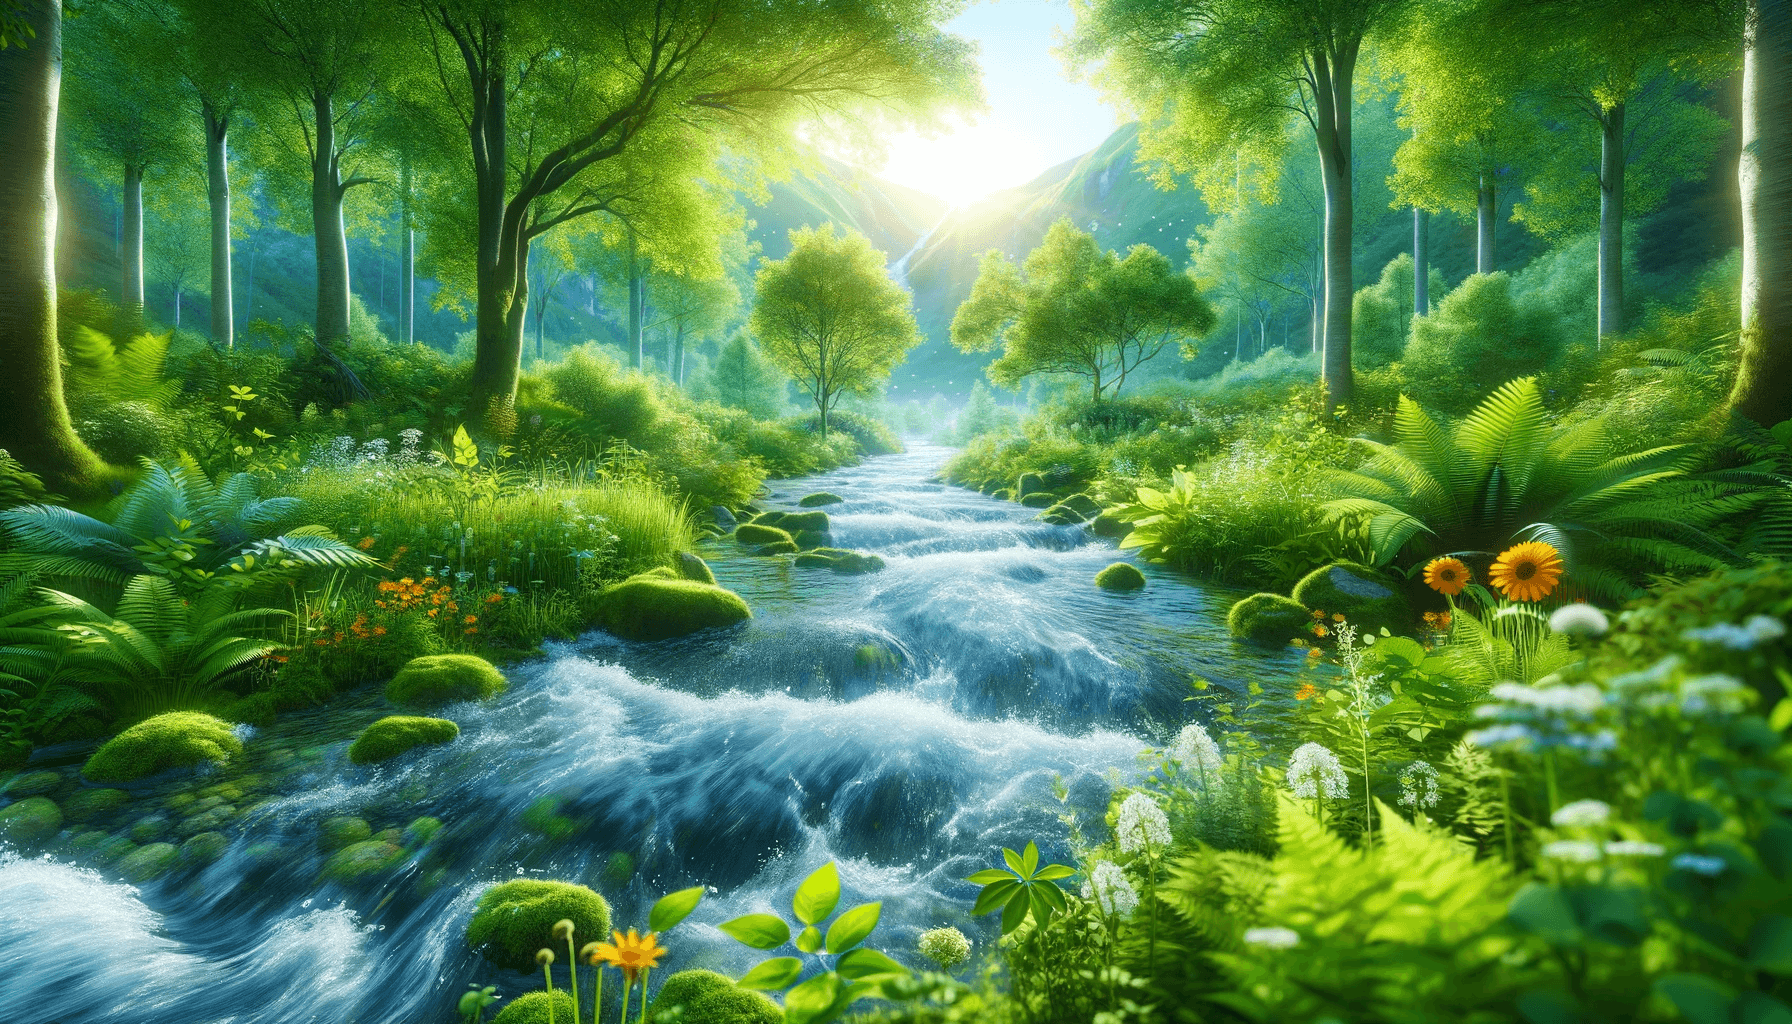 A serene nature scene depicting clean water and lush greenery symbolizing fulvic acid's positive effects